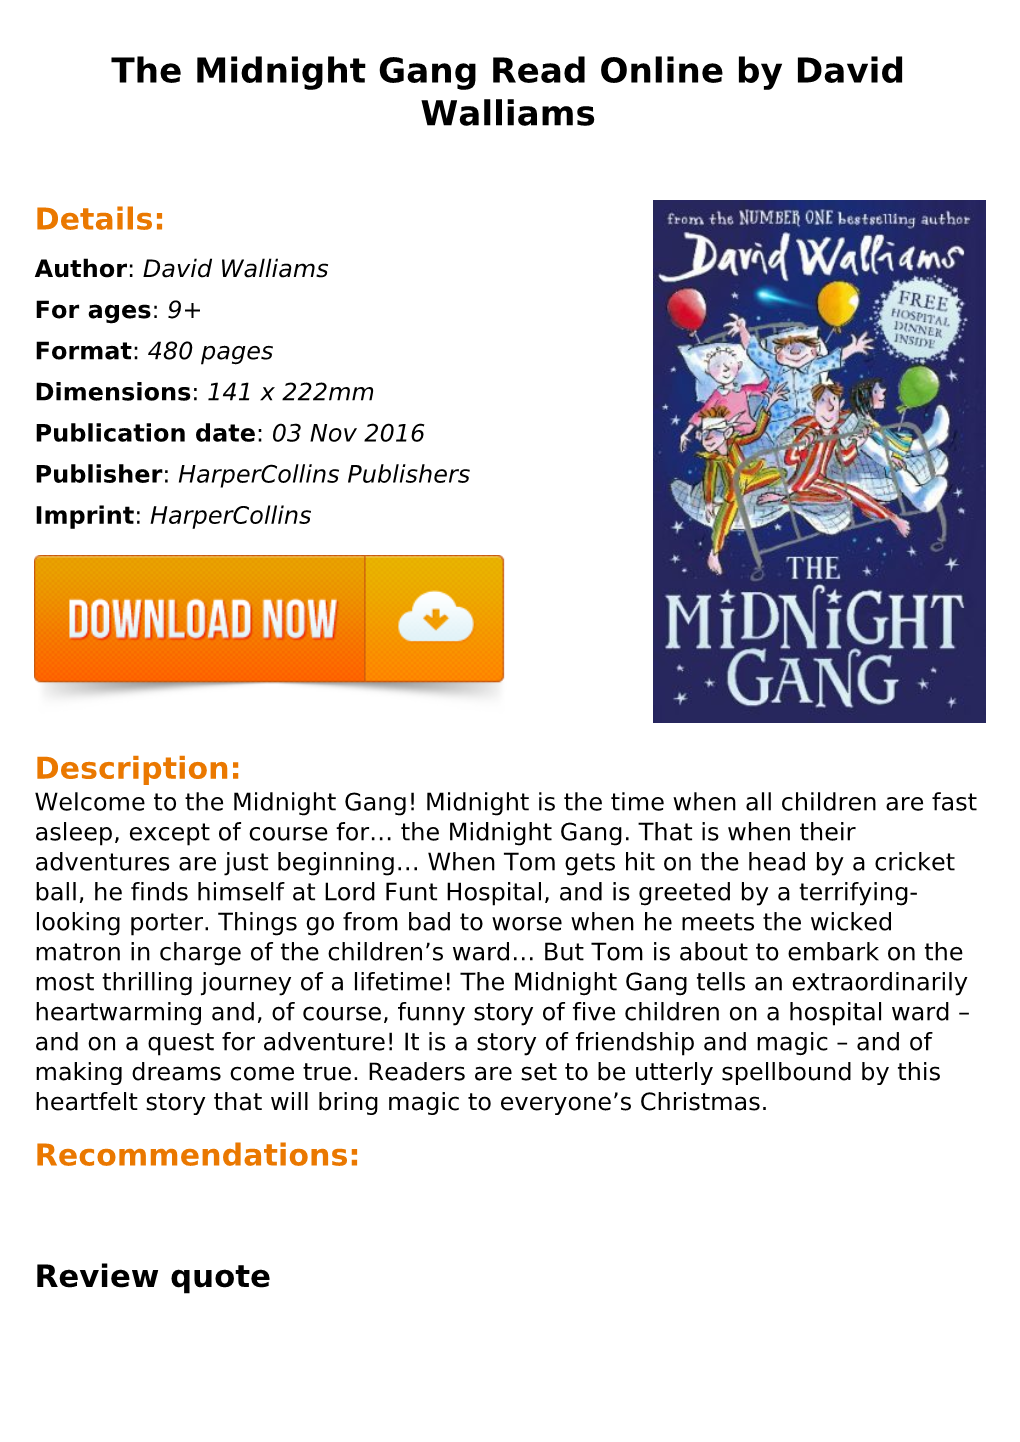 The Midnight Gang Read Online by David Walliams